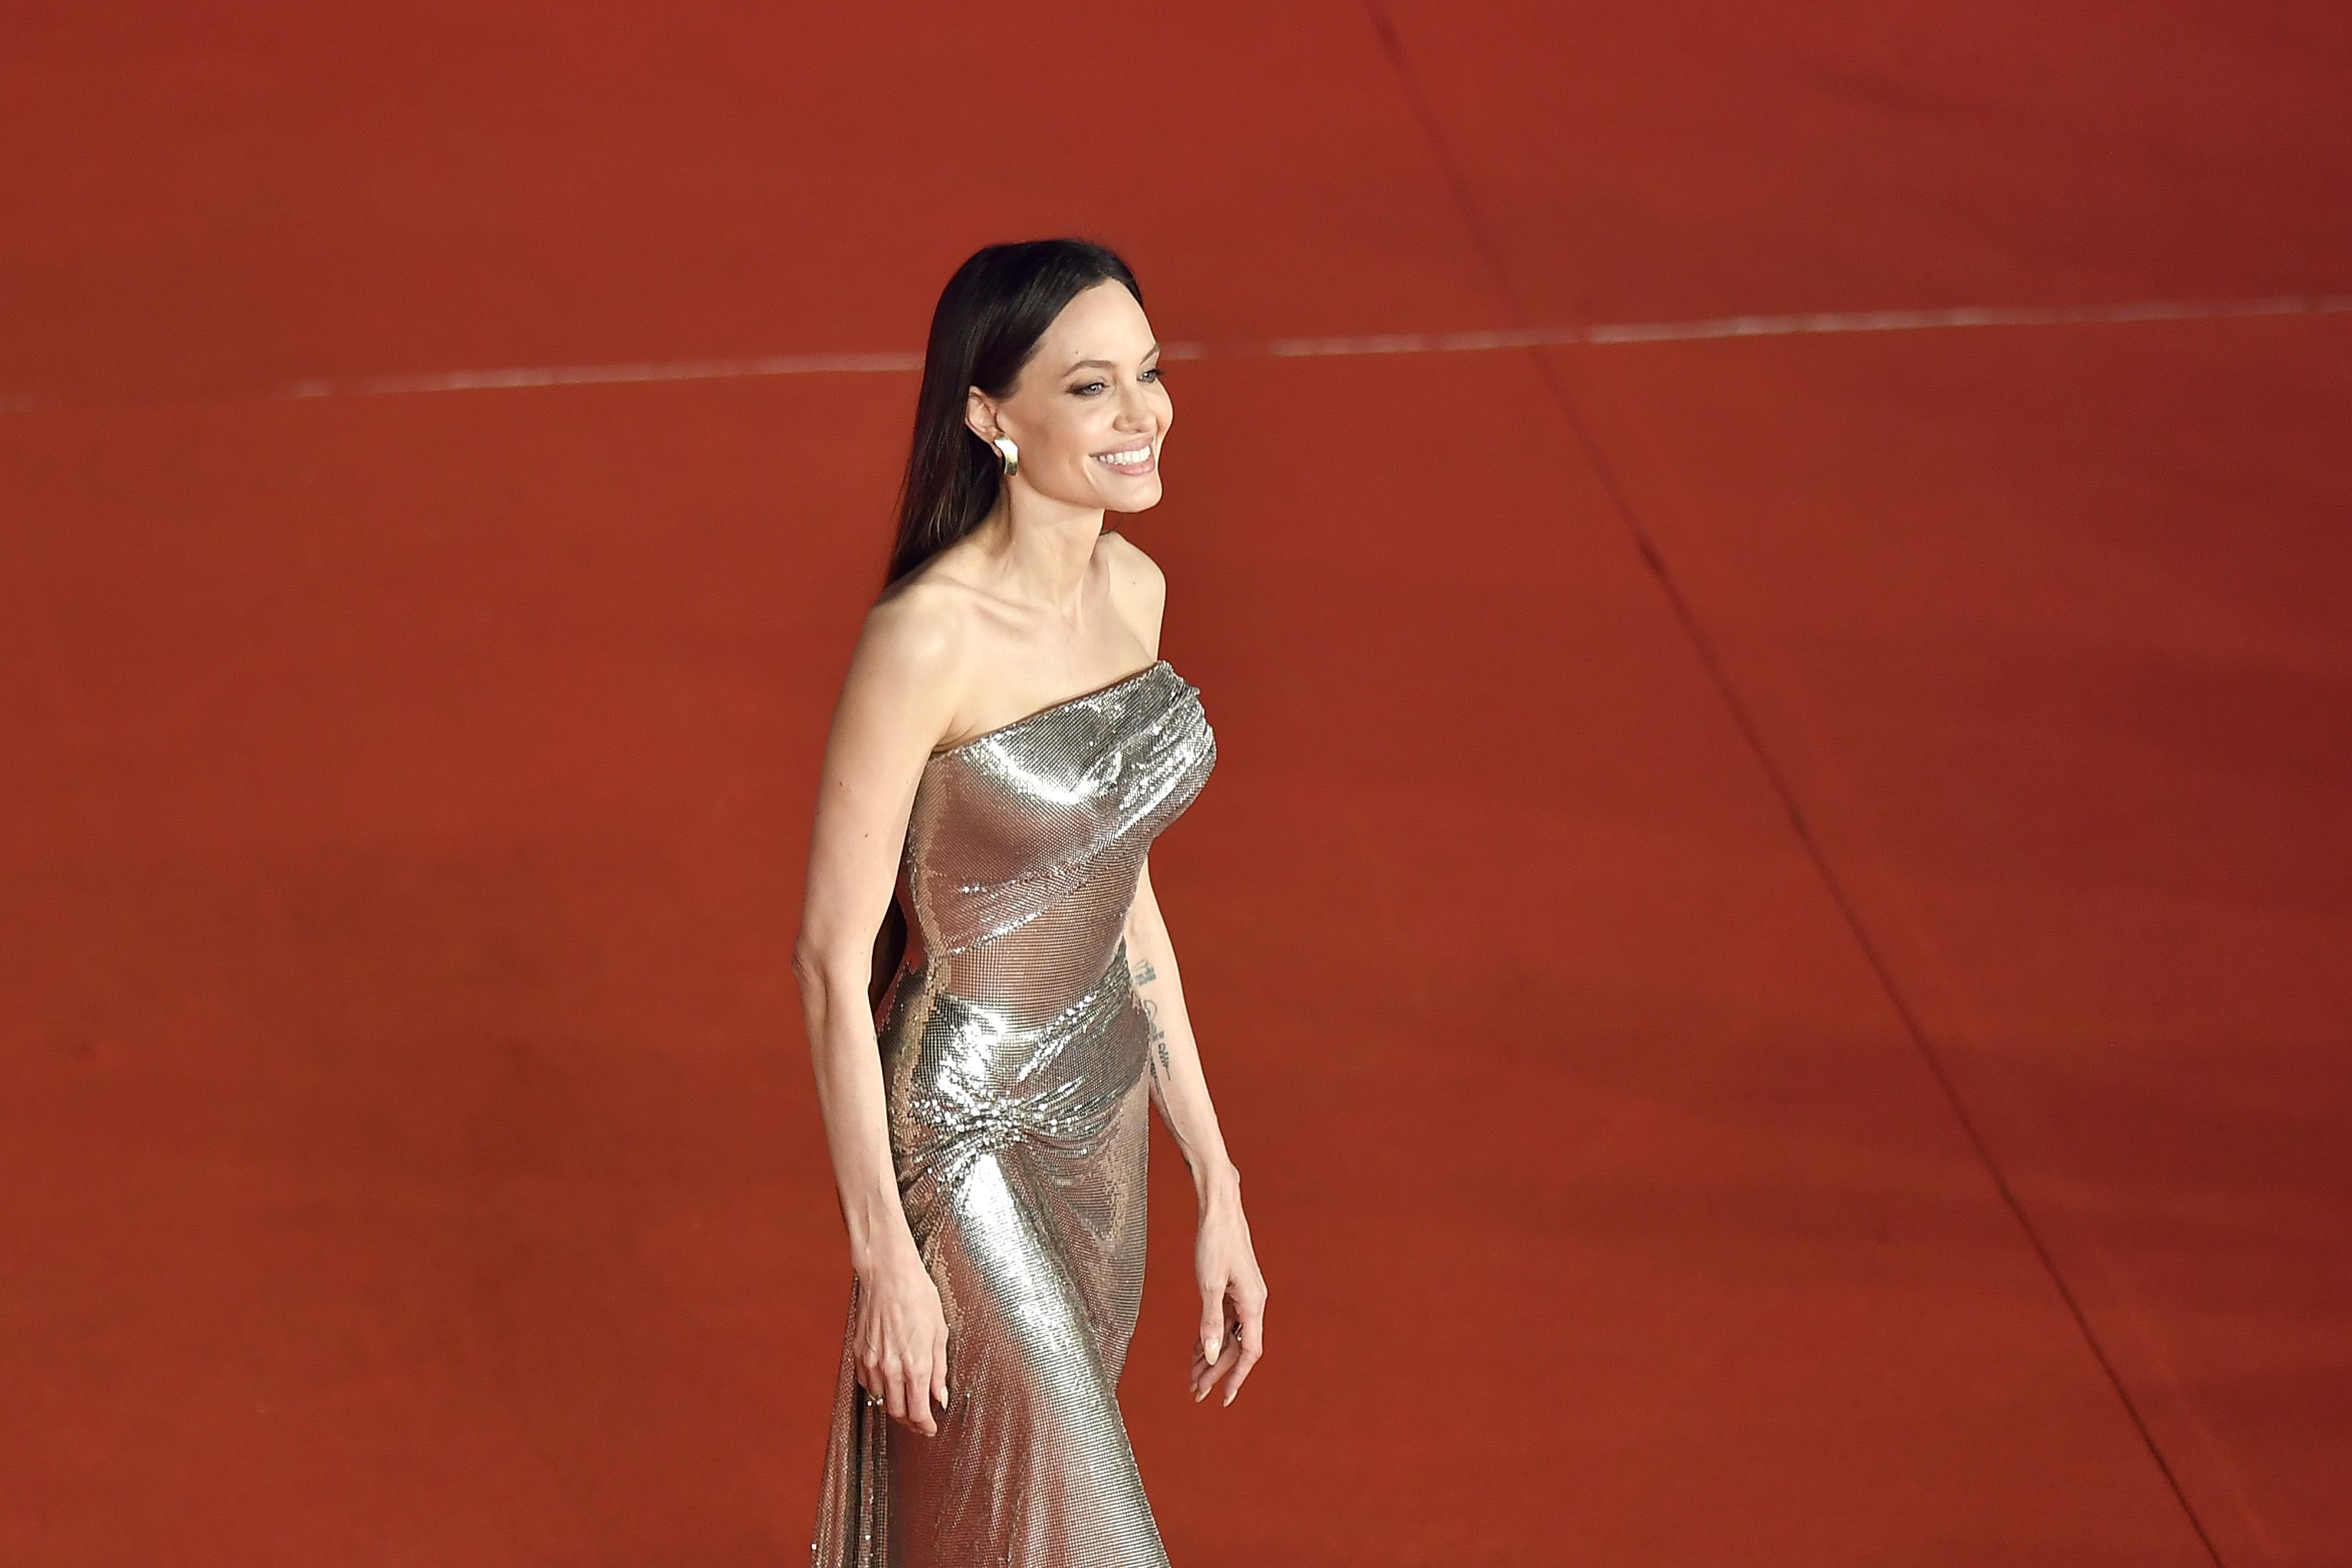 Angelina Jolie Is A High-End Fashion Chic: Know The Expensive